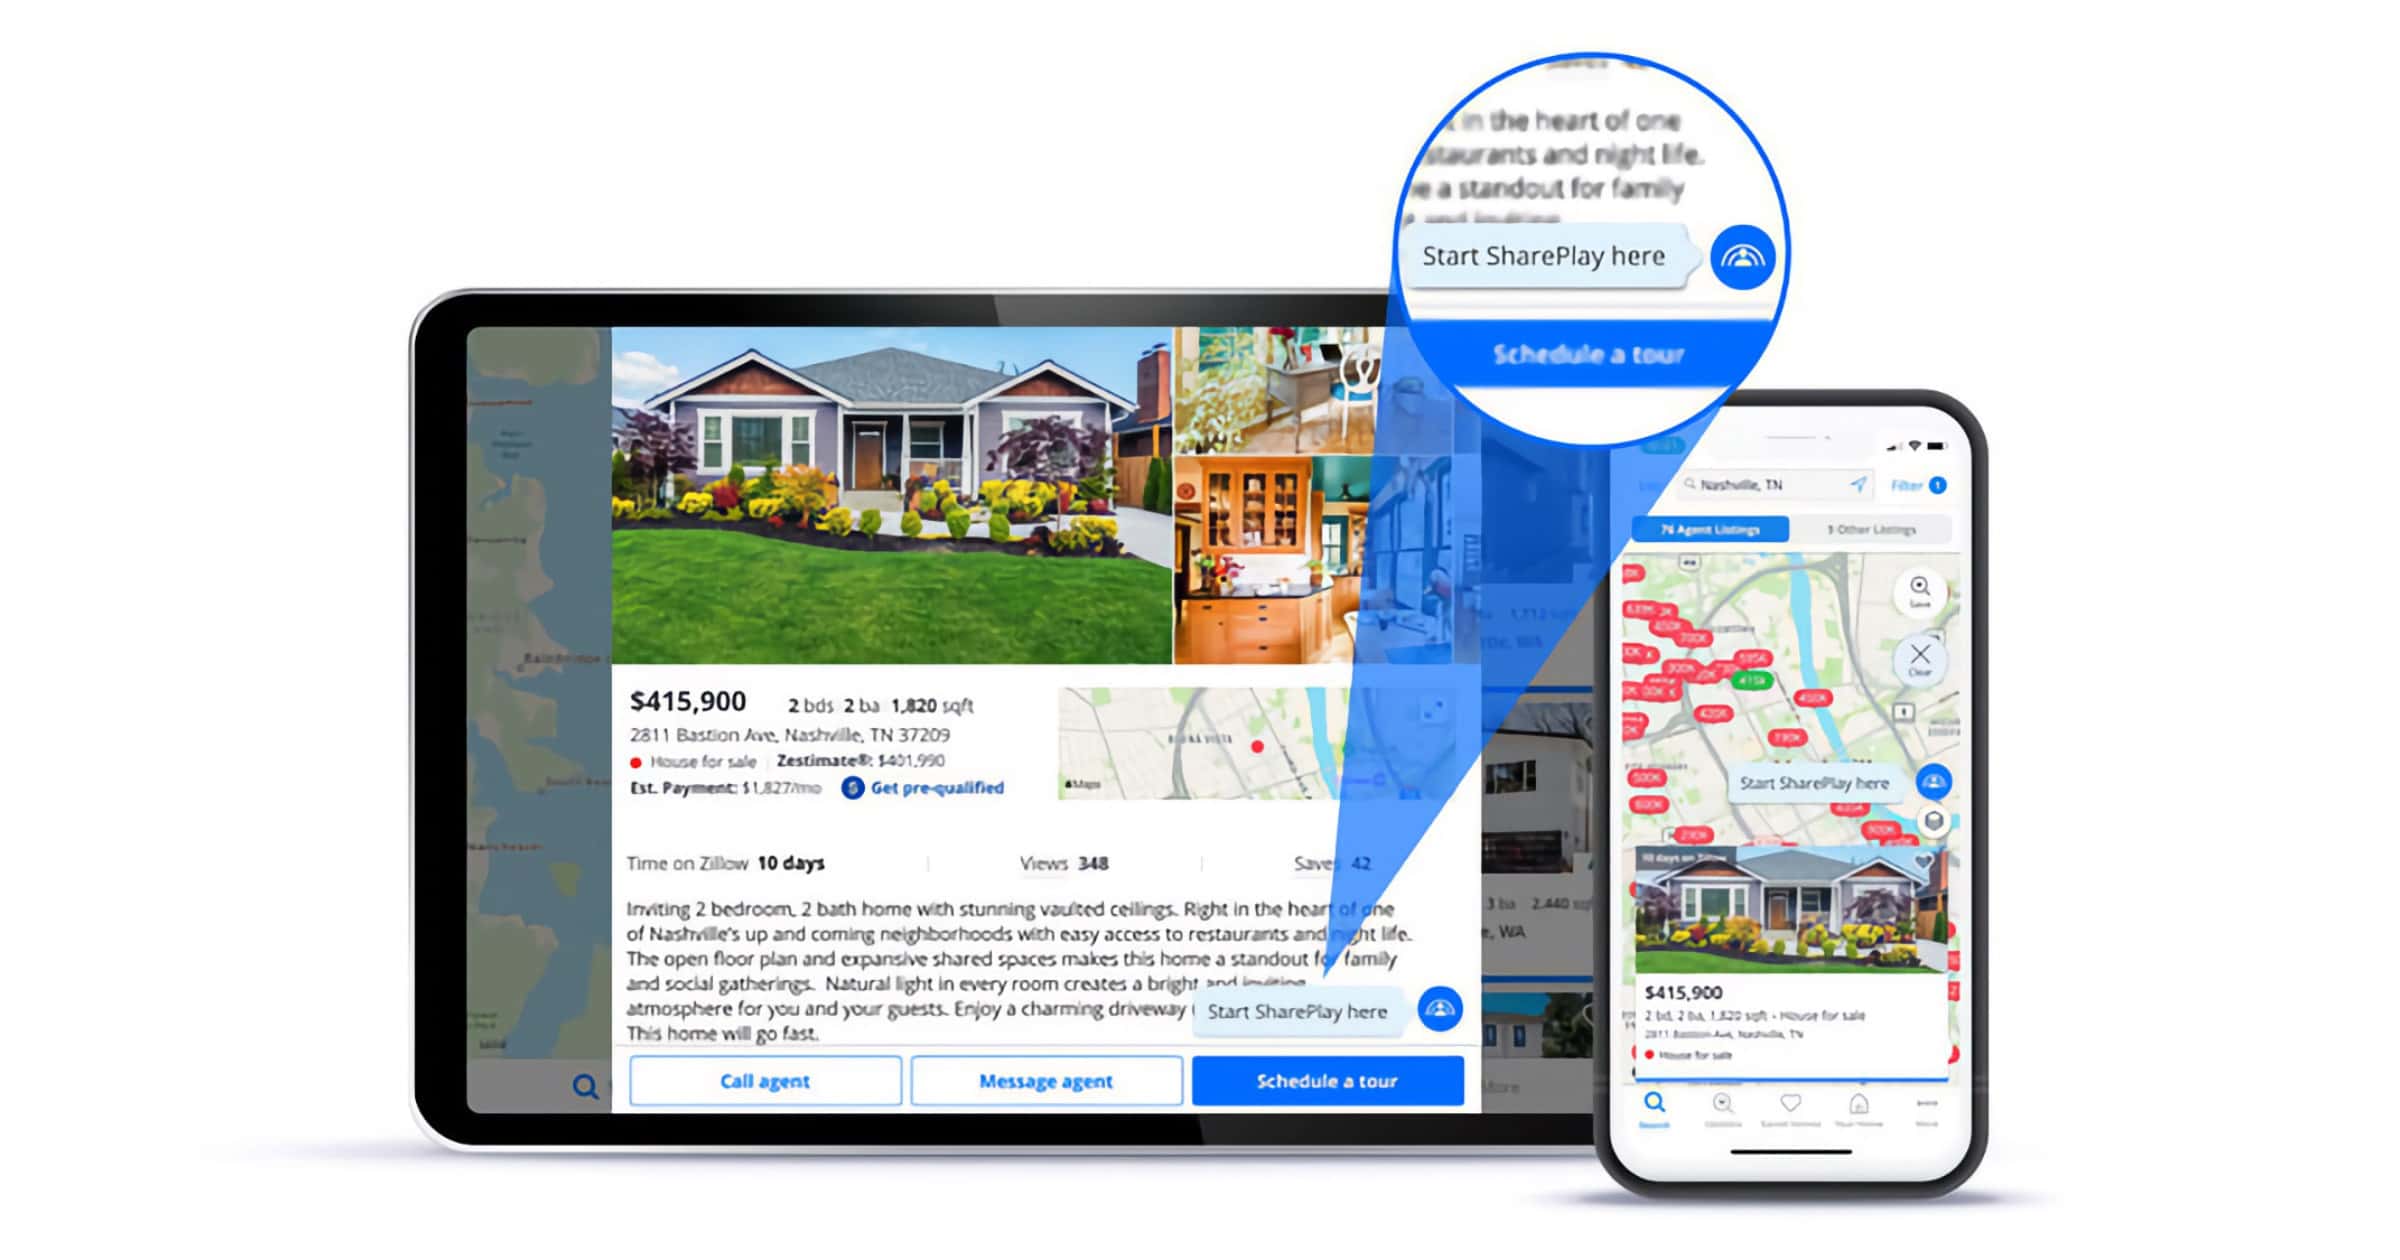 Zillow Adds Support for FaceTime SharePlay to Browse Houses